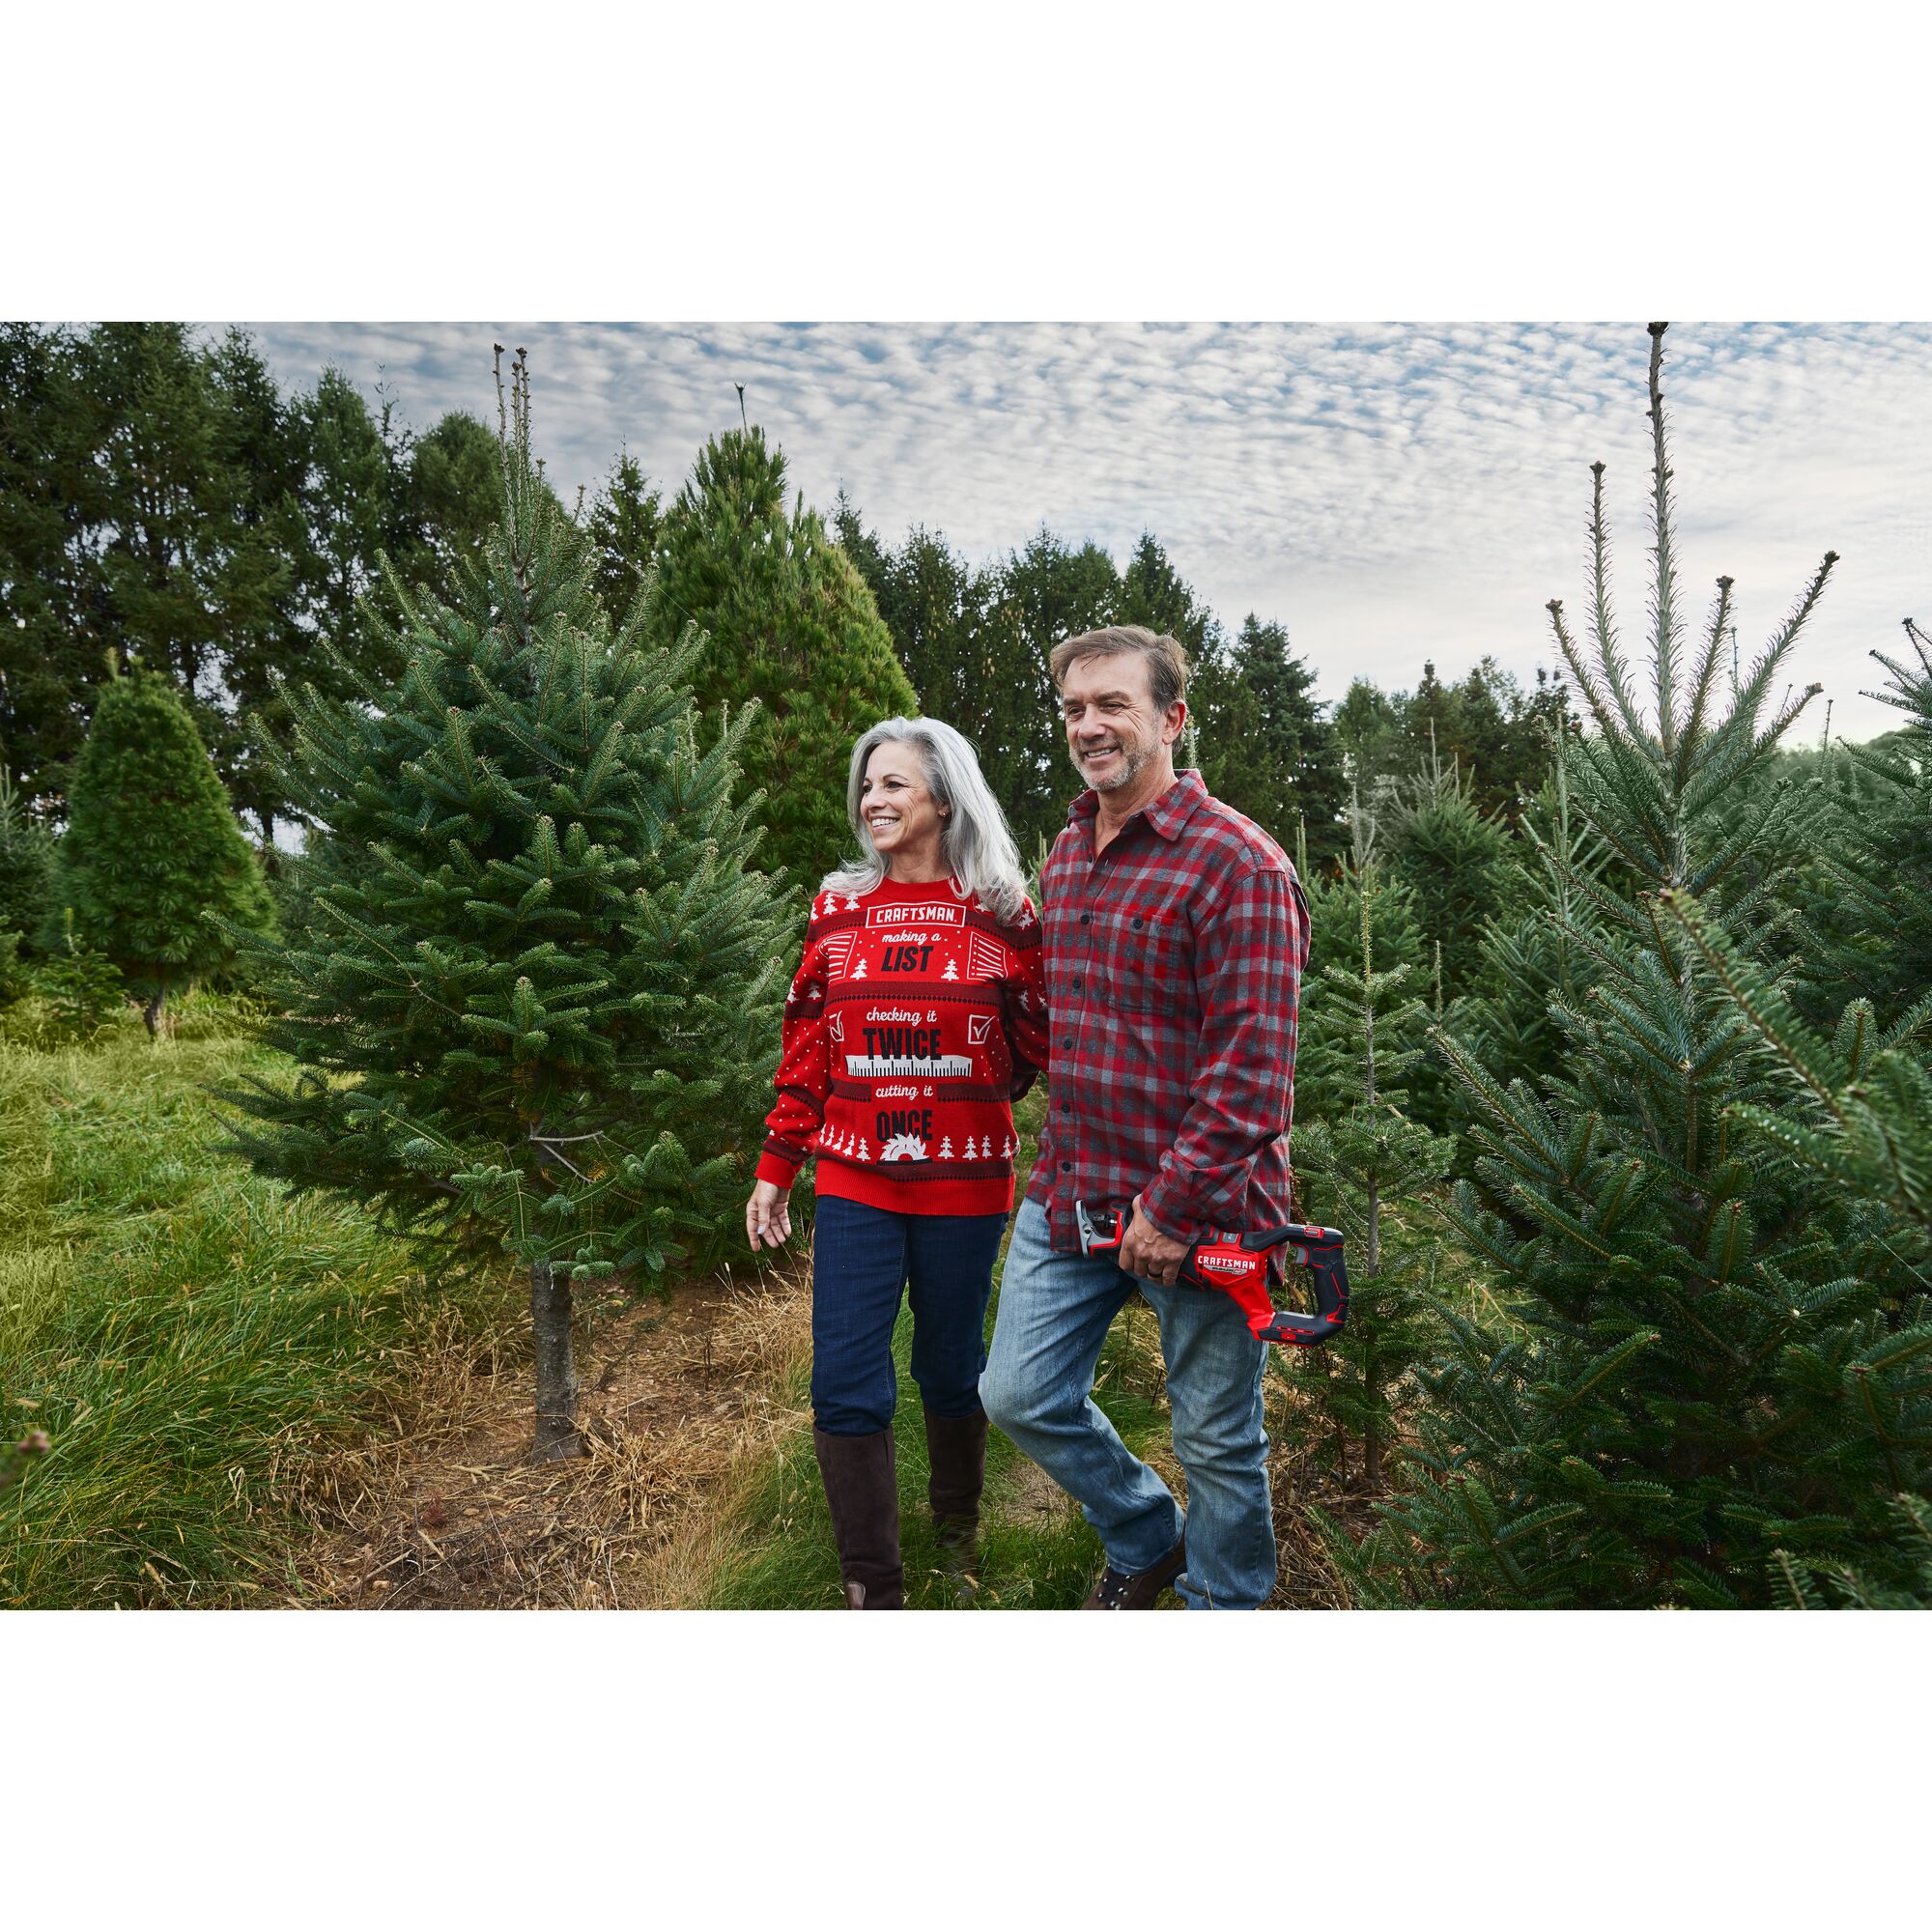 Female wearing CRAFTSMAN Holiday Sweater walking with male on Christmas tree farm